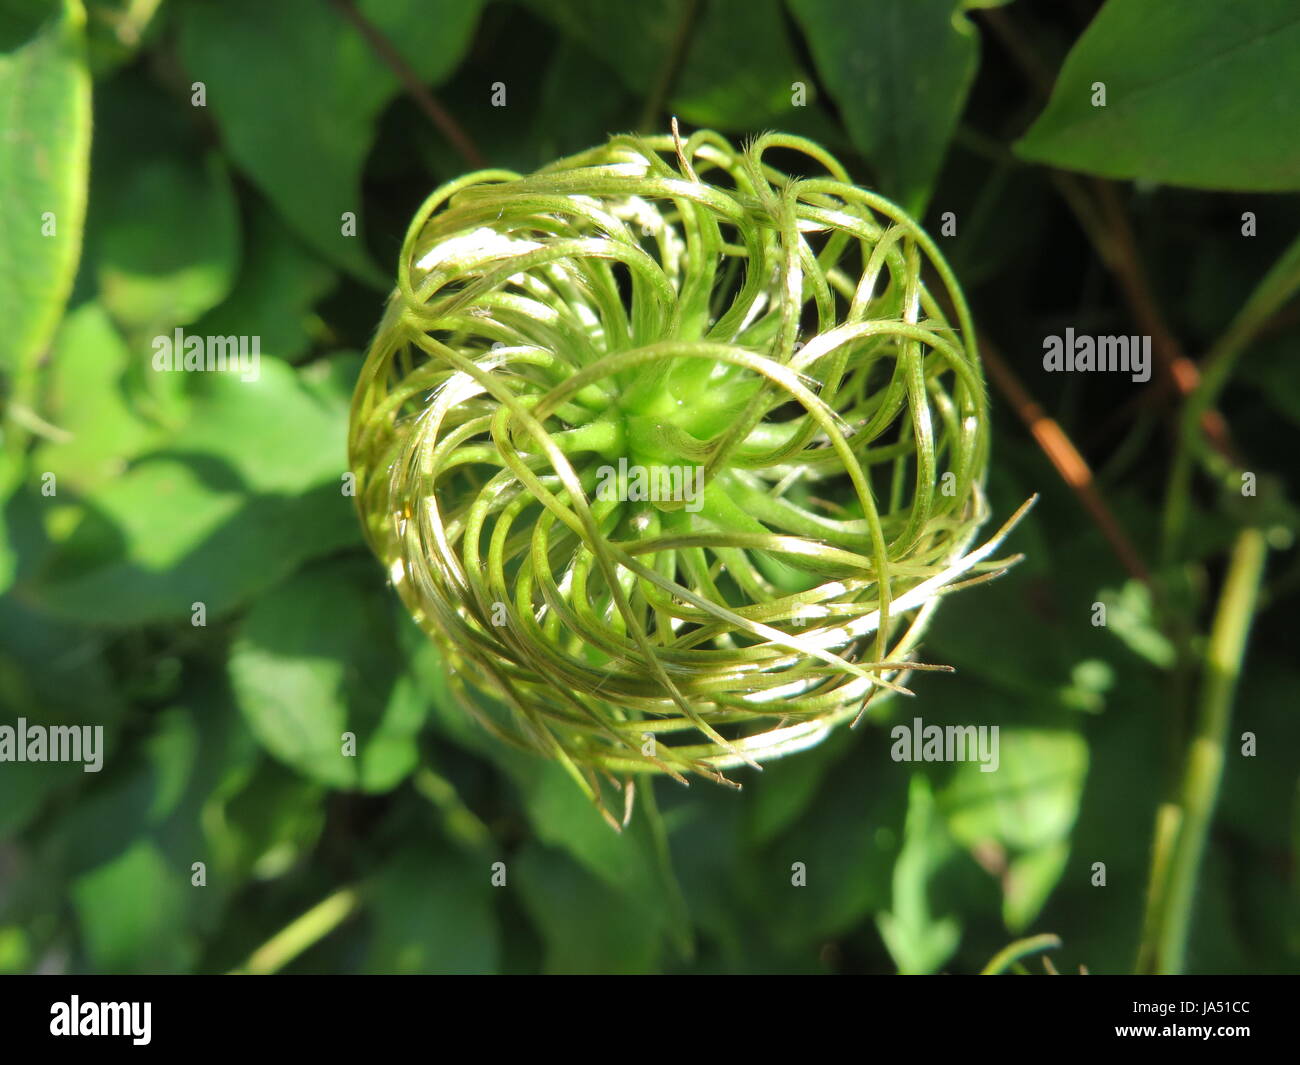 flower, plant, clematis, withers, seed vessel, beautiful, beauteously, nice, Stock Photo